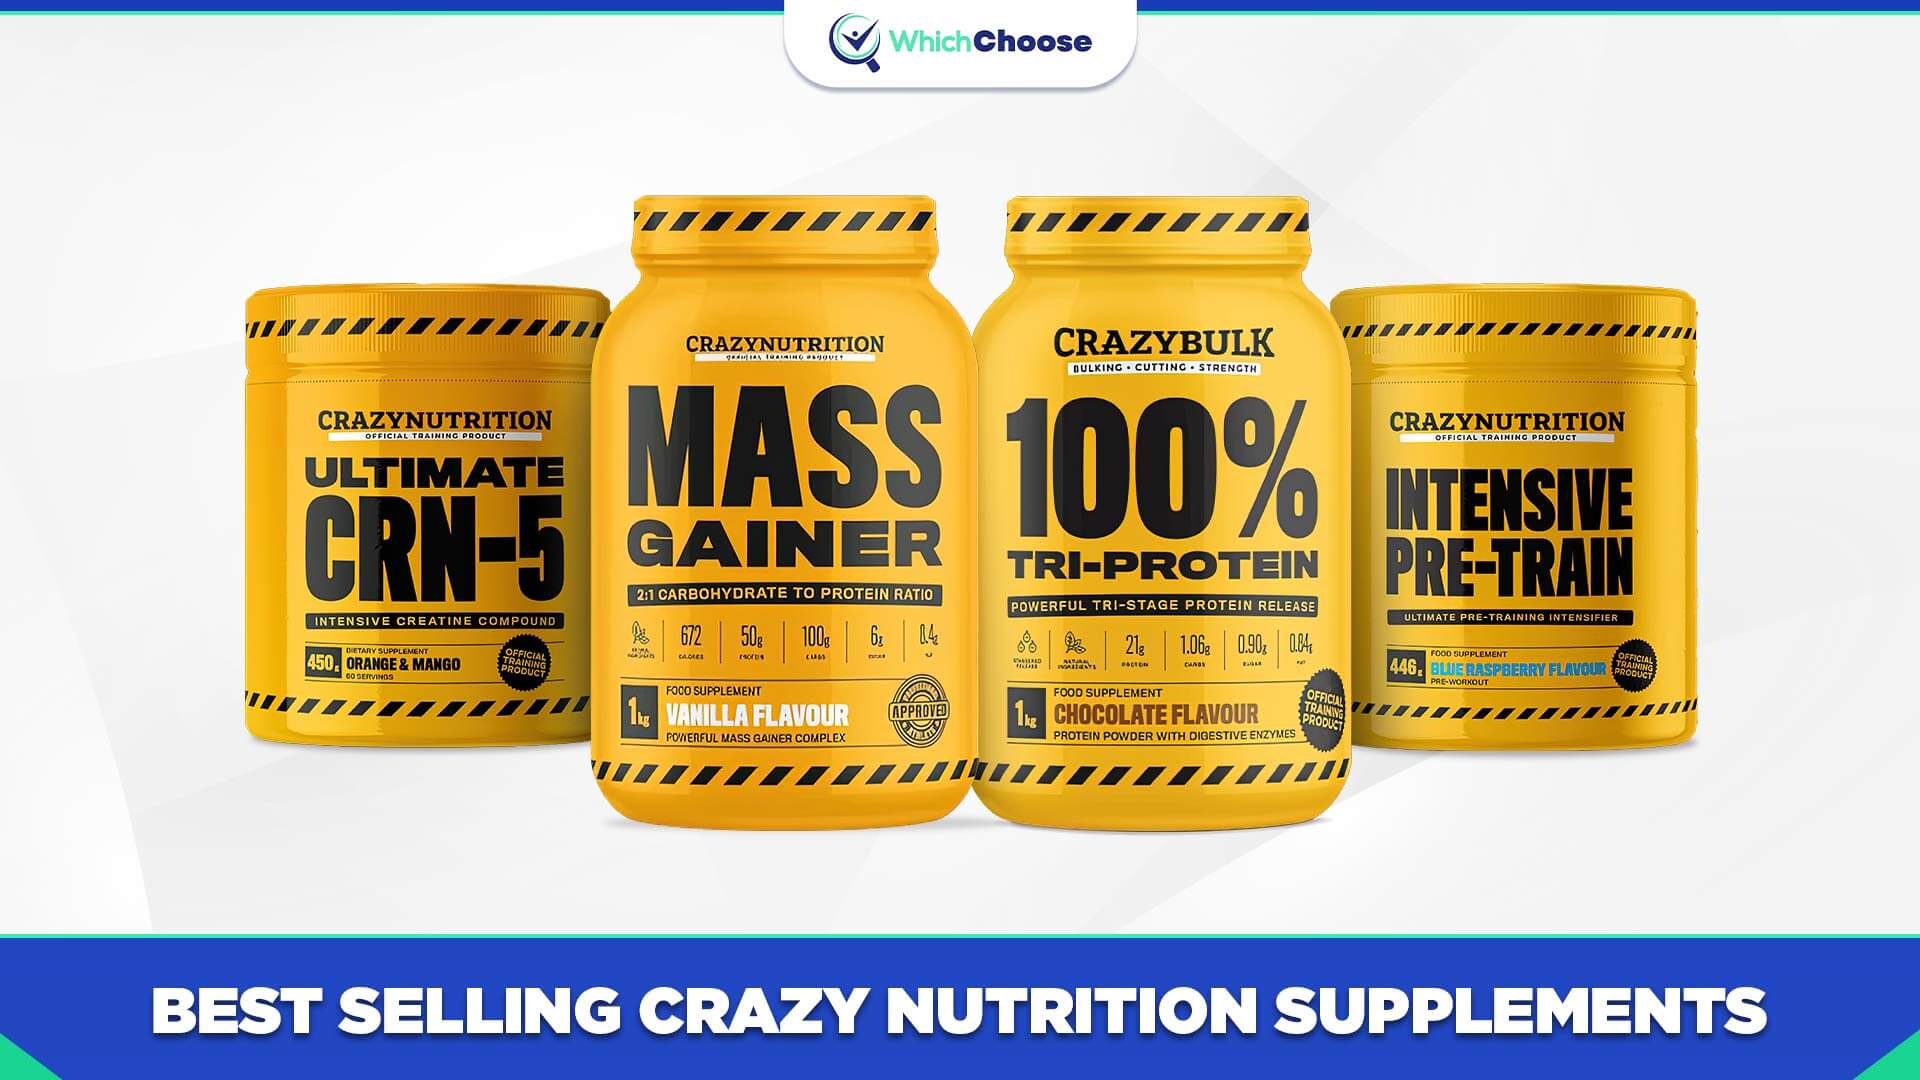 Best Selling Crazy Nutrition Supplements